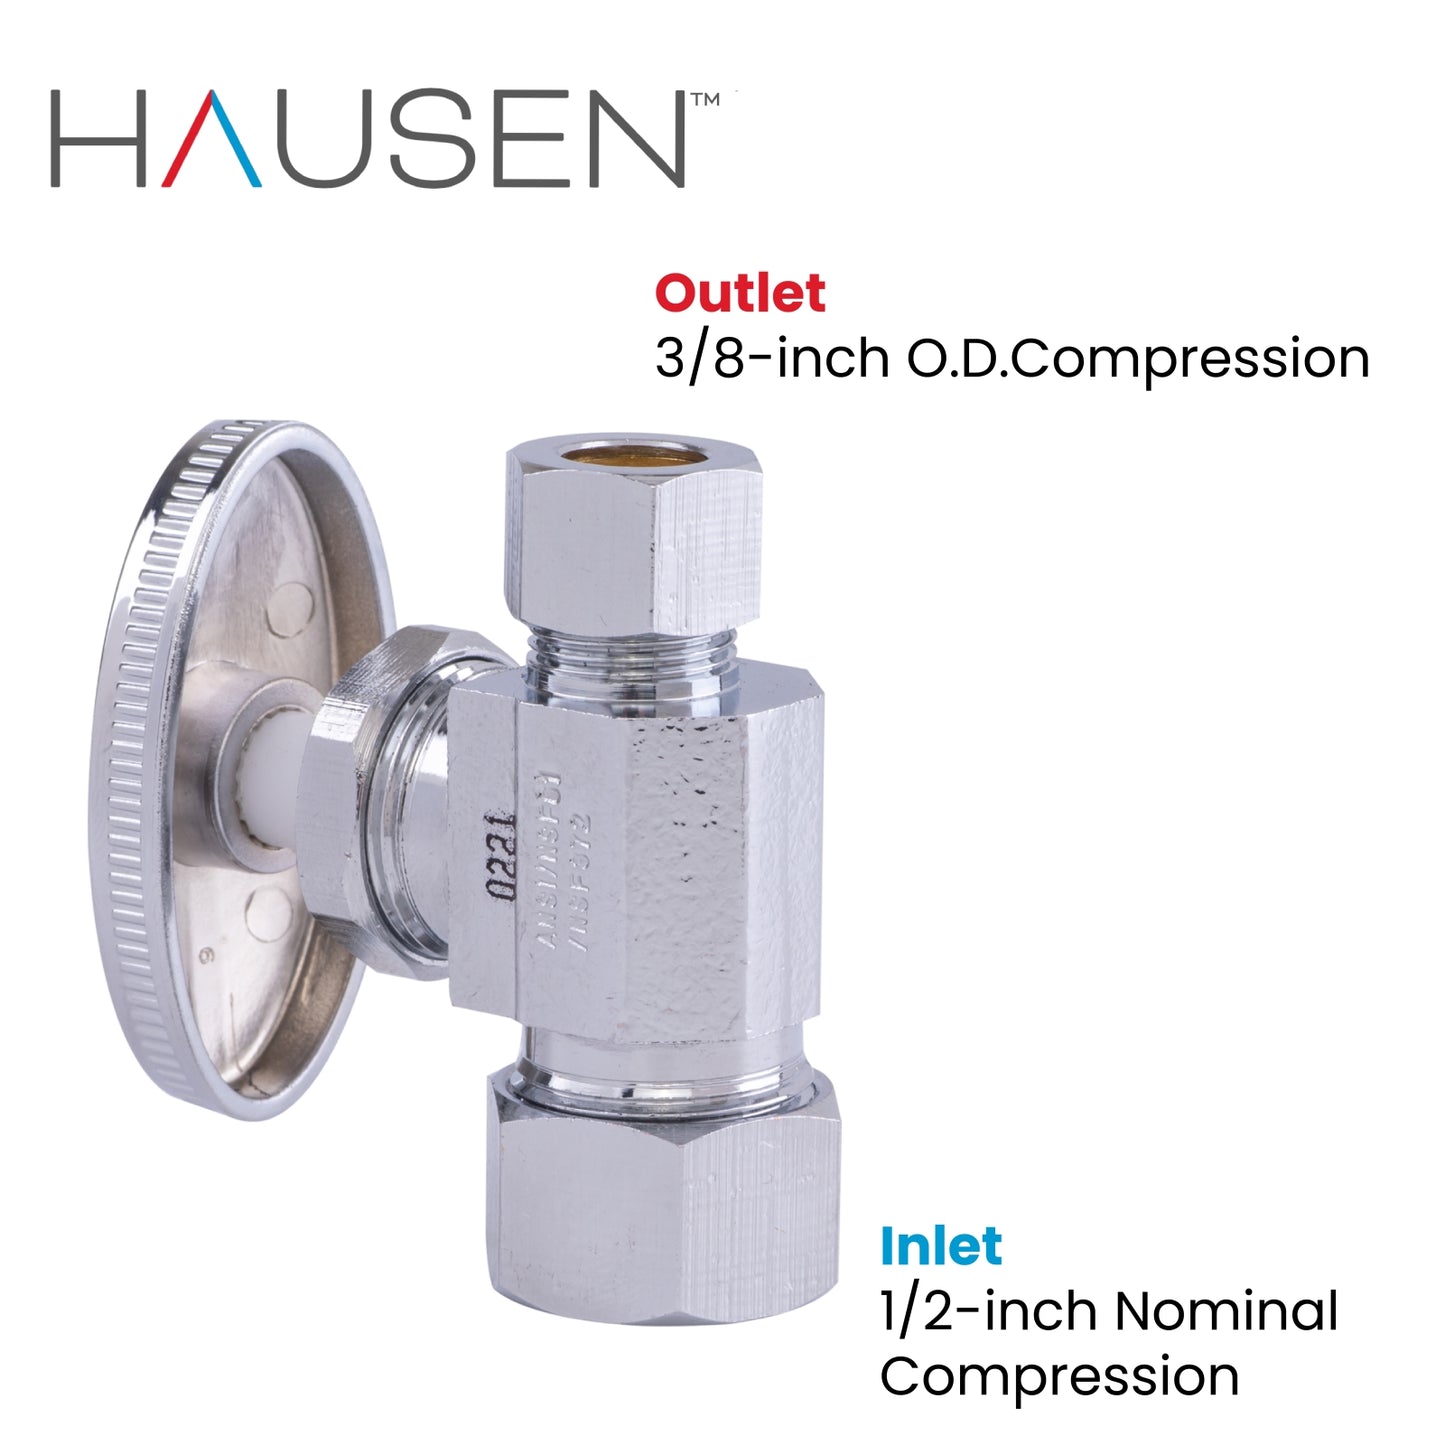 Hausen 1/2-inch Nominal Compression Inlet x 3/8-inch O.D. Compression Outlet Multi-Turn Straight Water Stop; Lead-Free Forged Brass; Chrome-Plated; Compatible with Copper Piping, 10-Pack